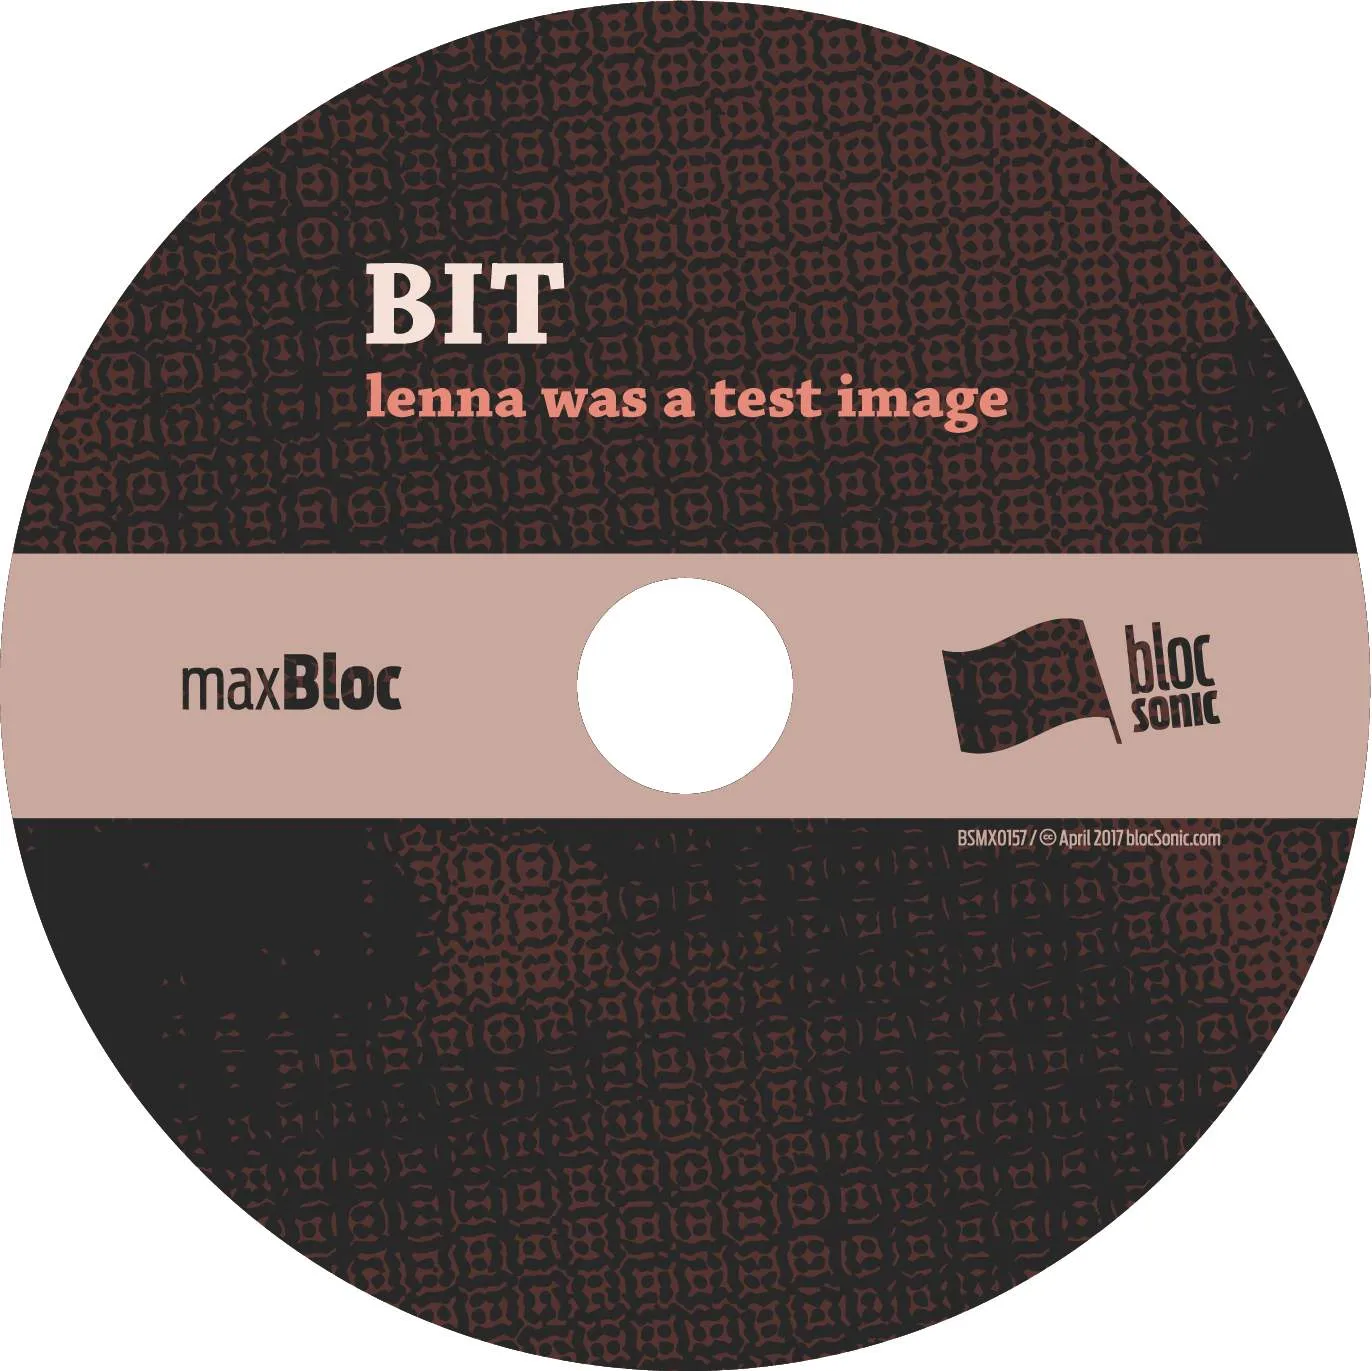 Album disc for “lenna was a test image” by BIT